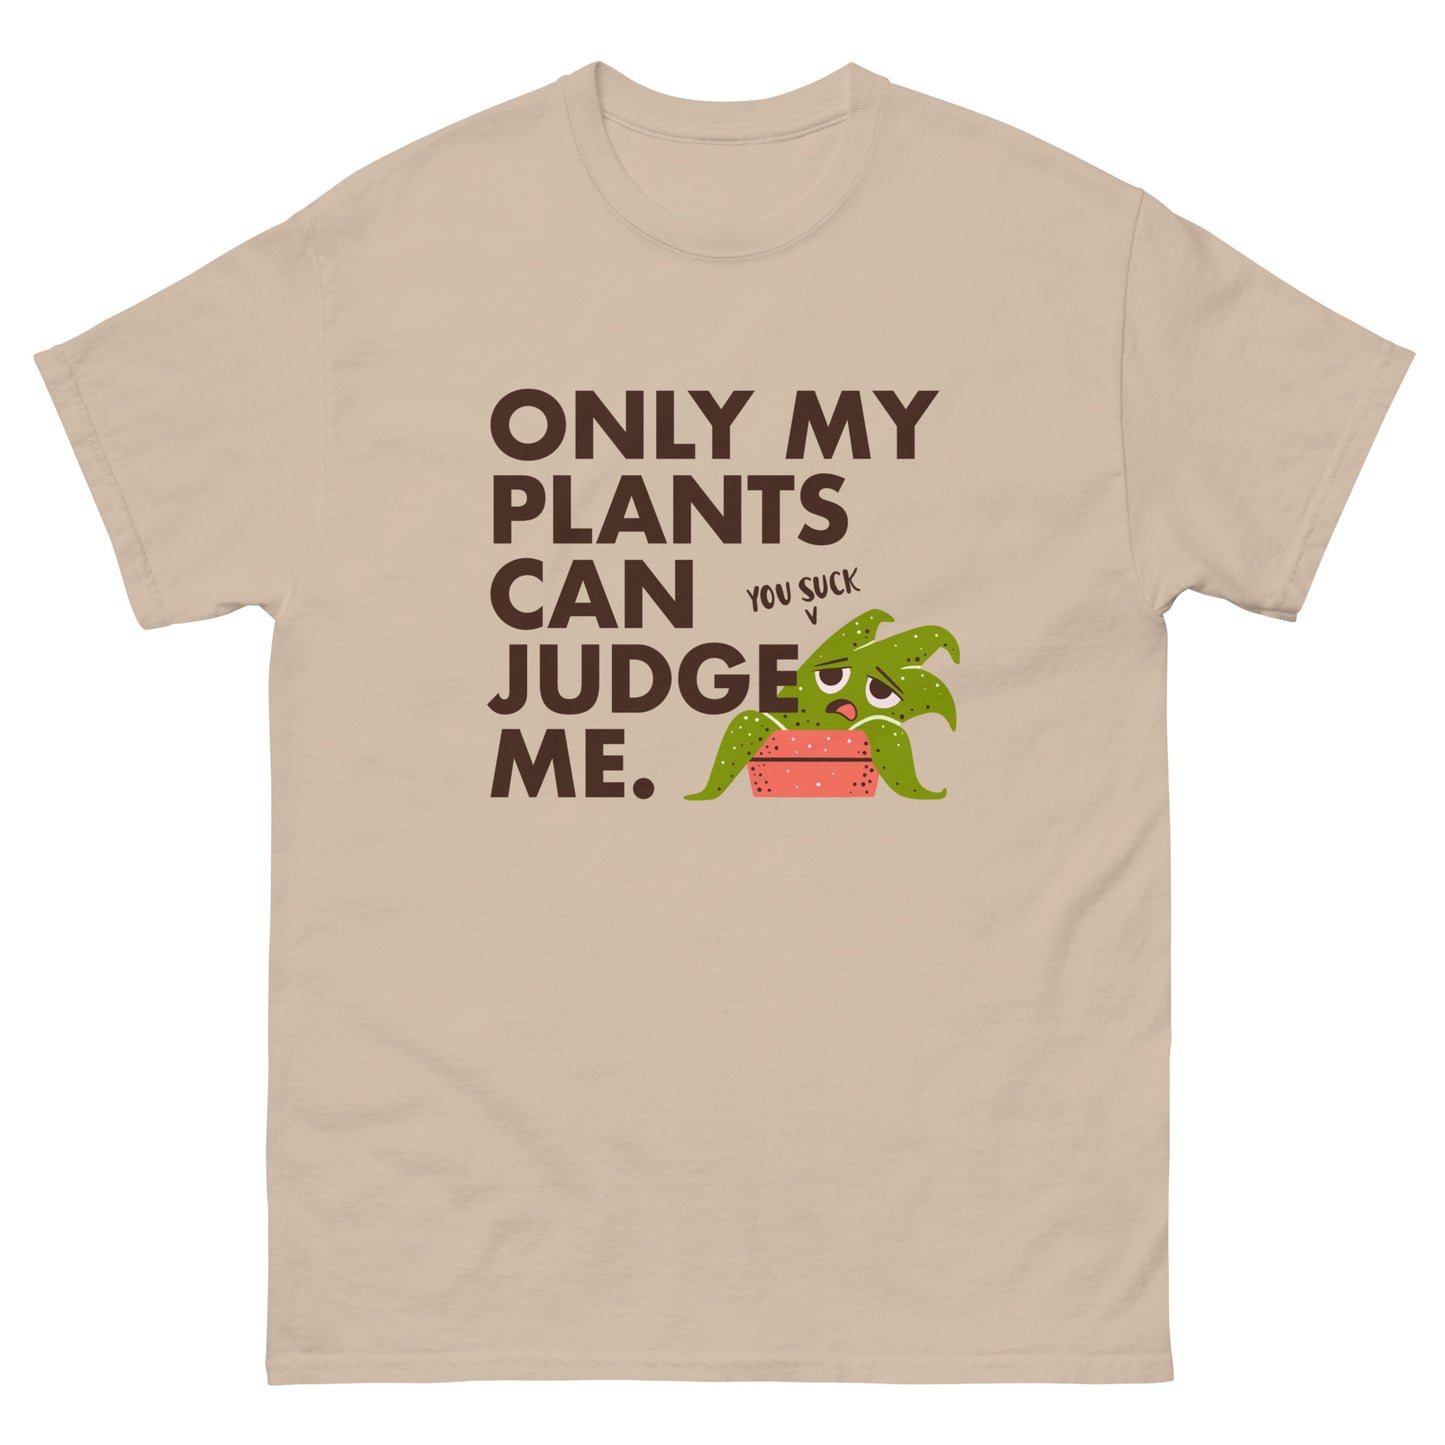 Only my plants can judge me - Funny Houseplant T-Shirt